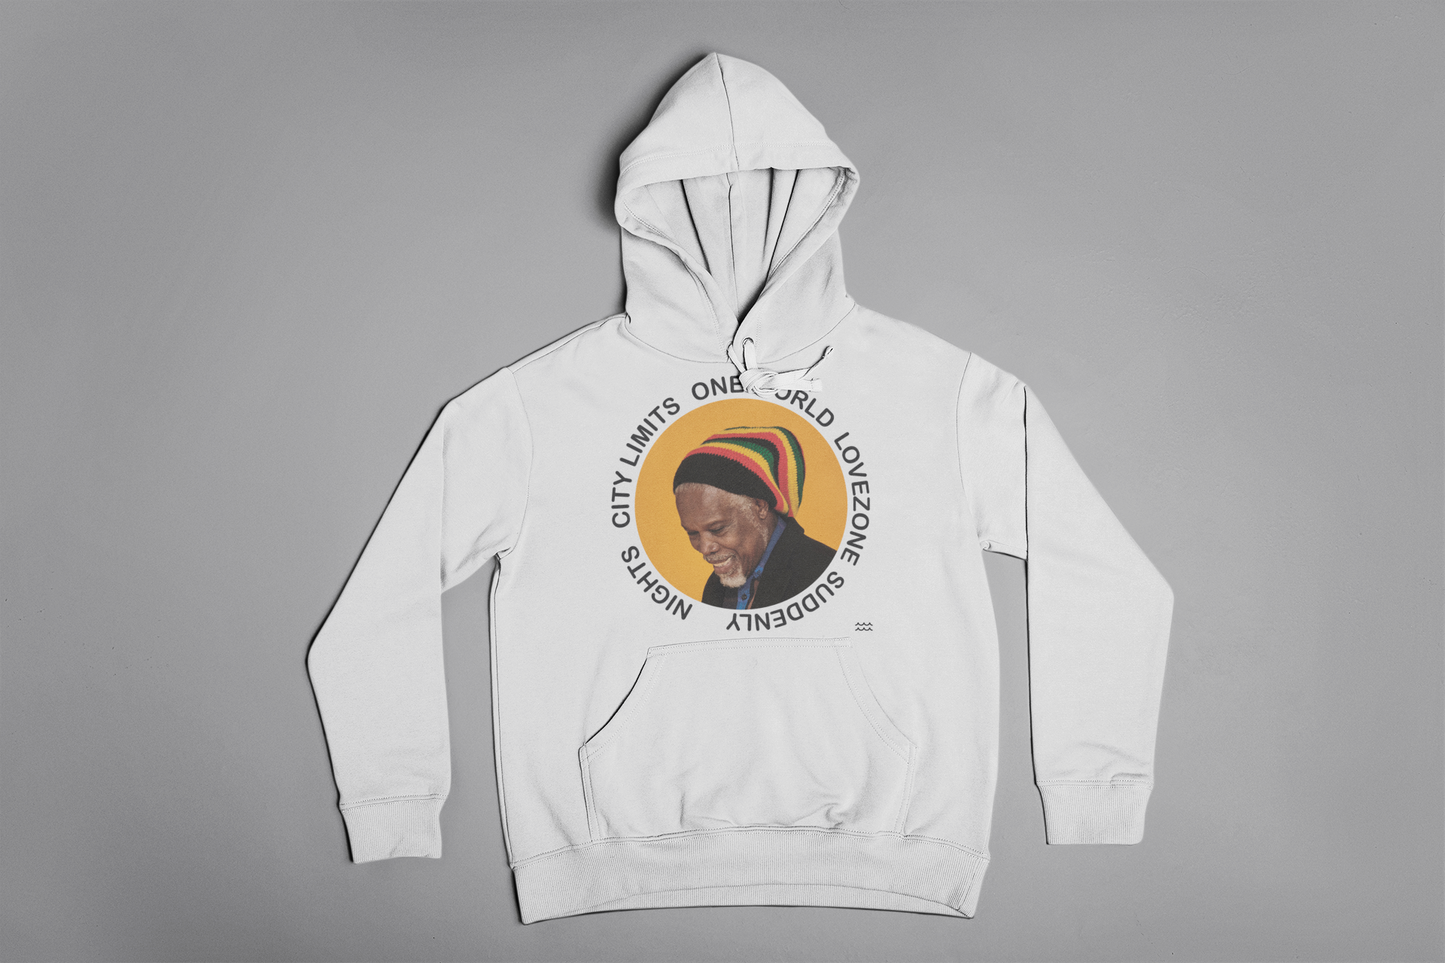 ALBUM CIRCLE - HOODIE FRONT PRINT ONLY